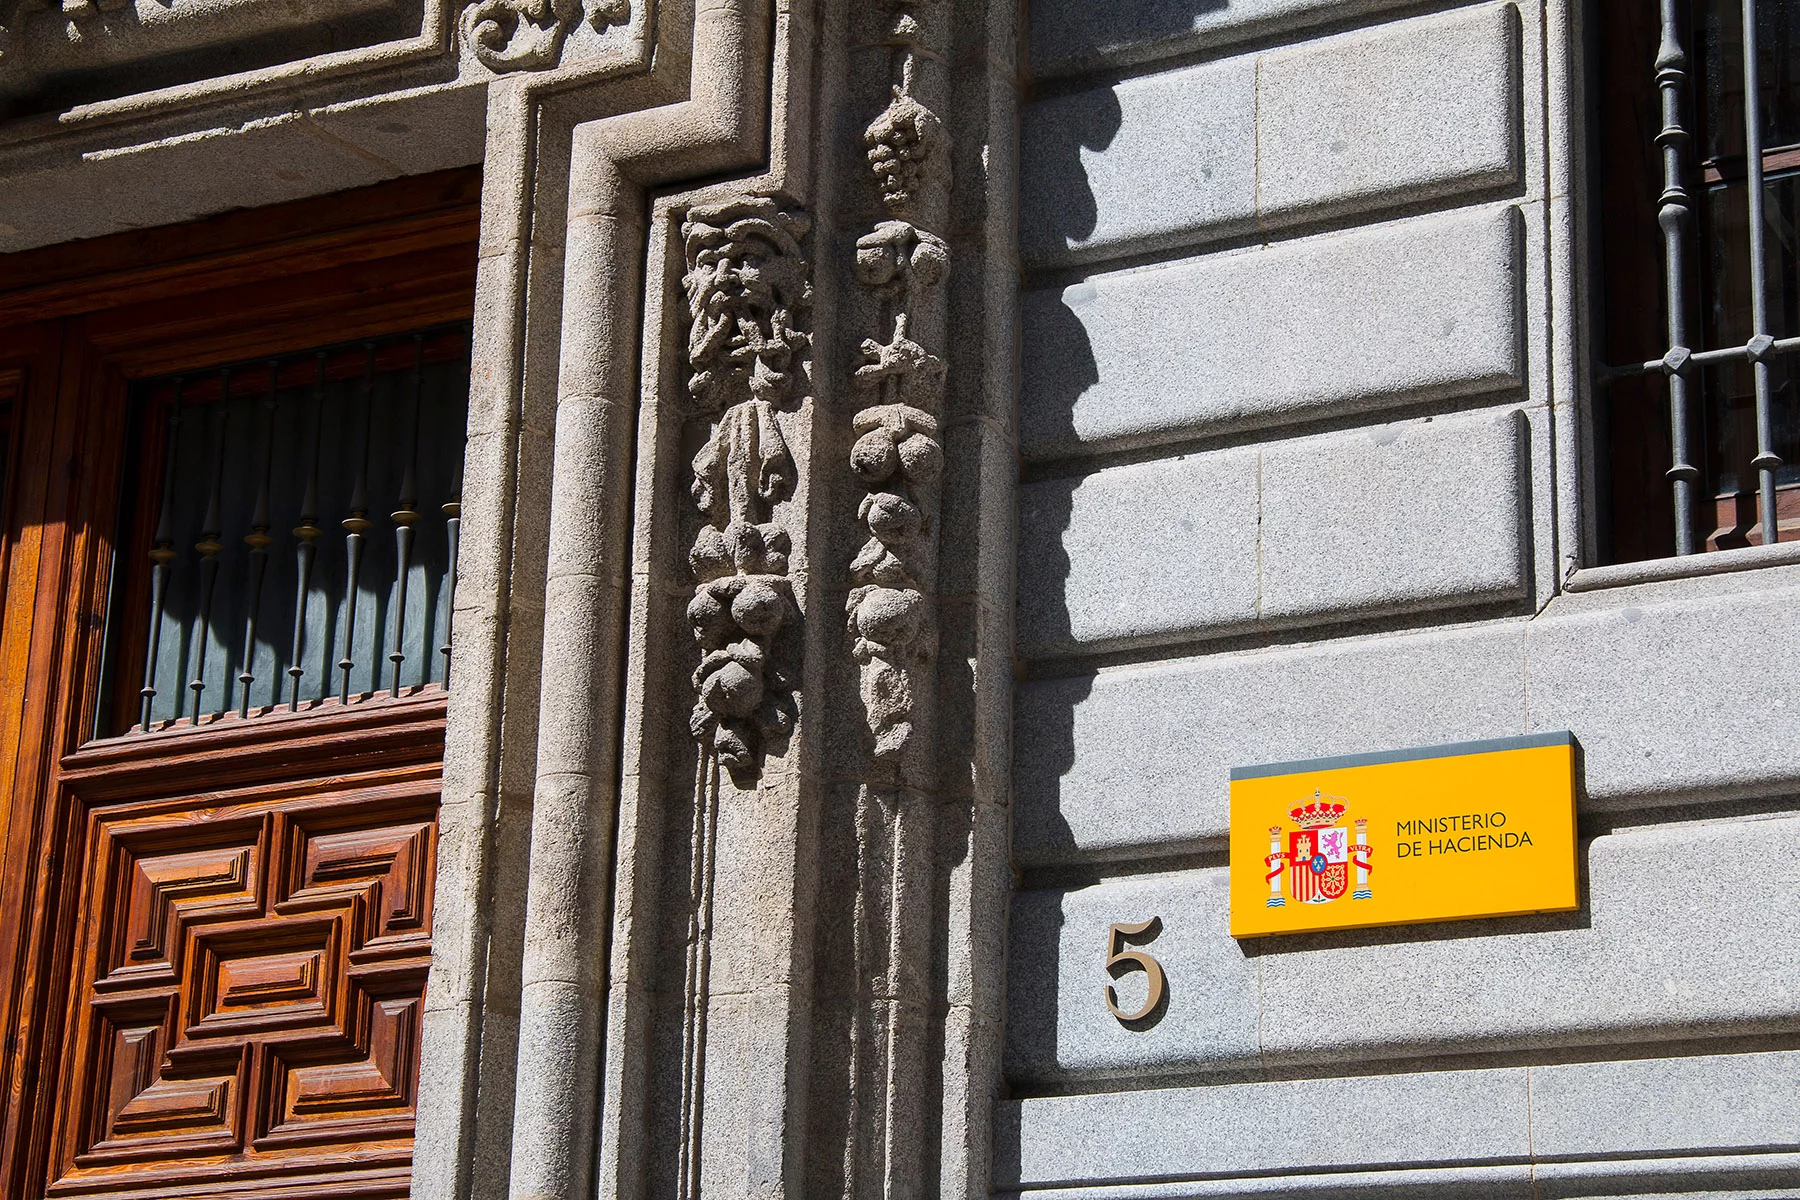 The Ministry of Finance in Spain